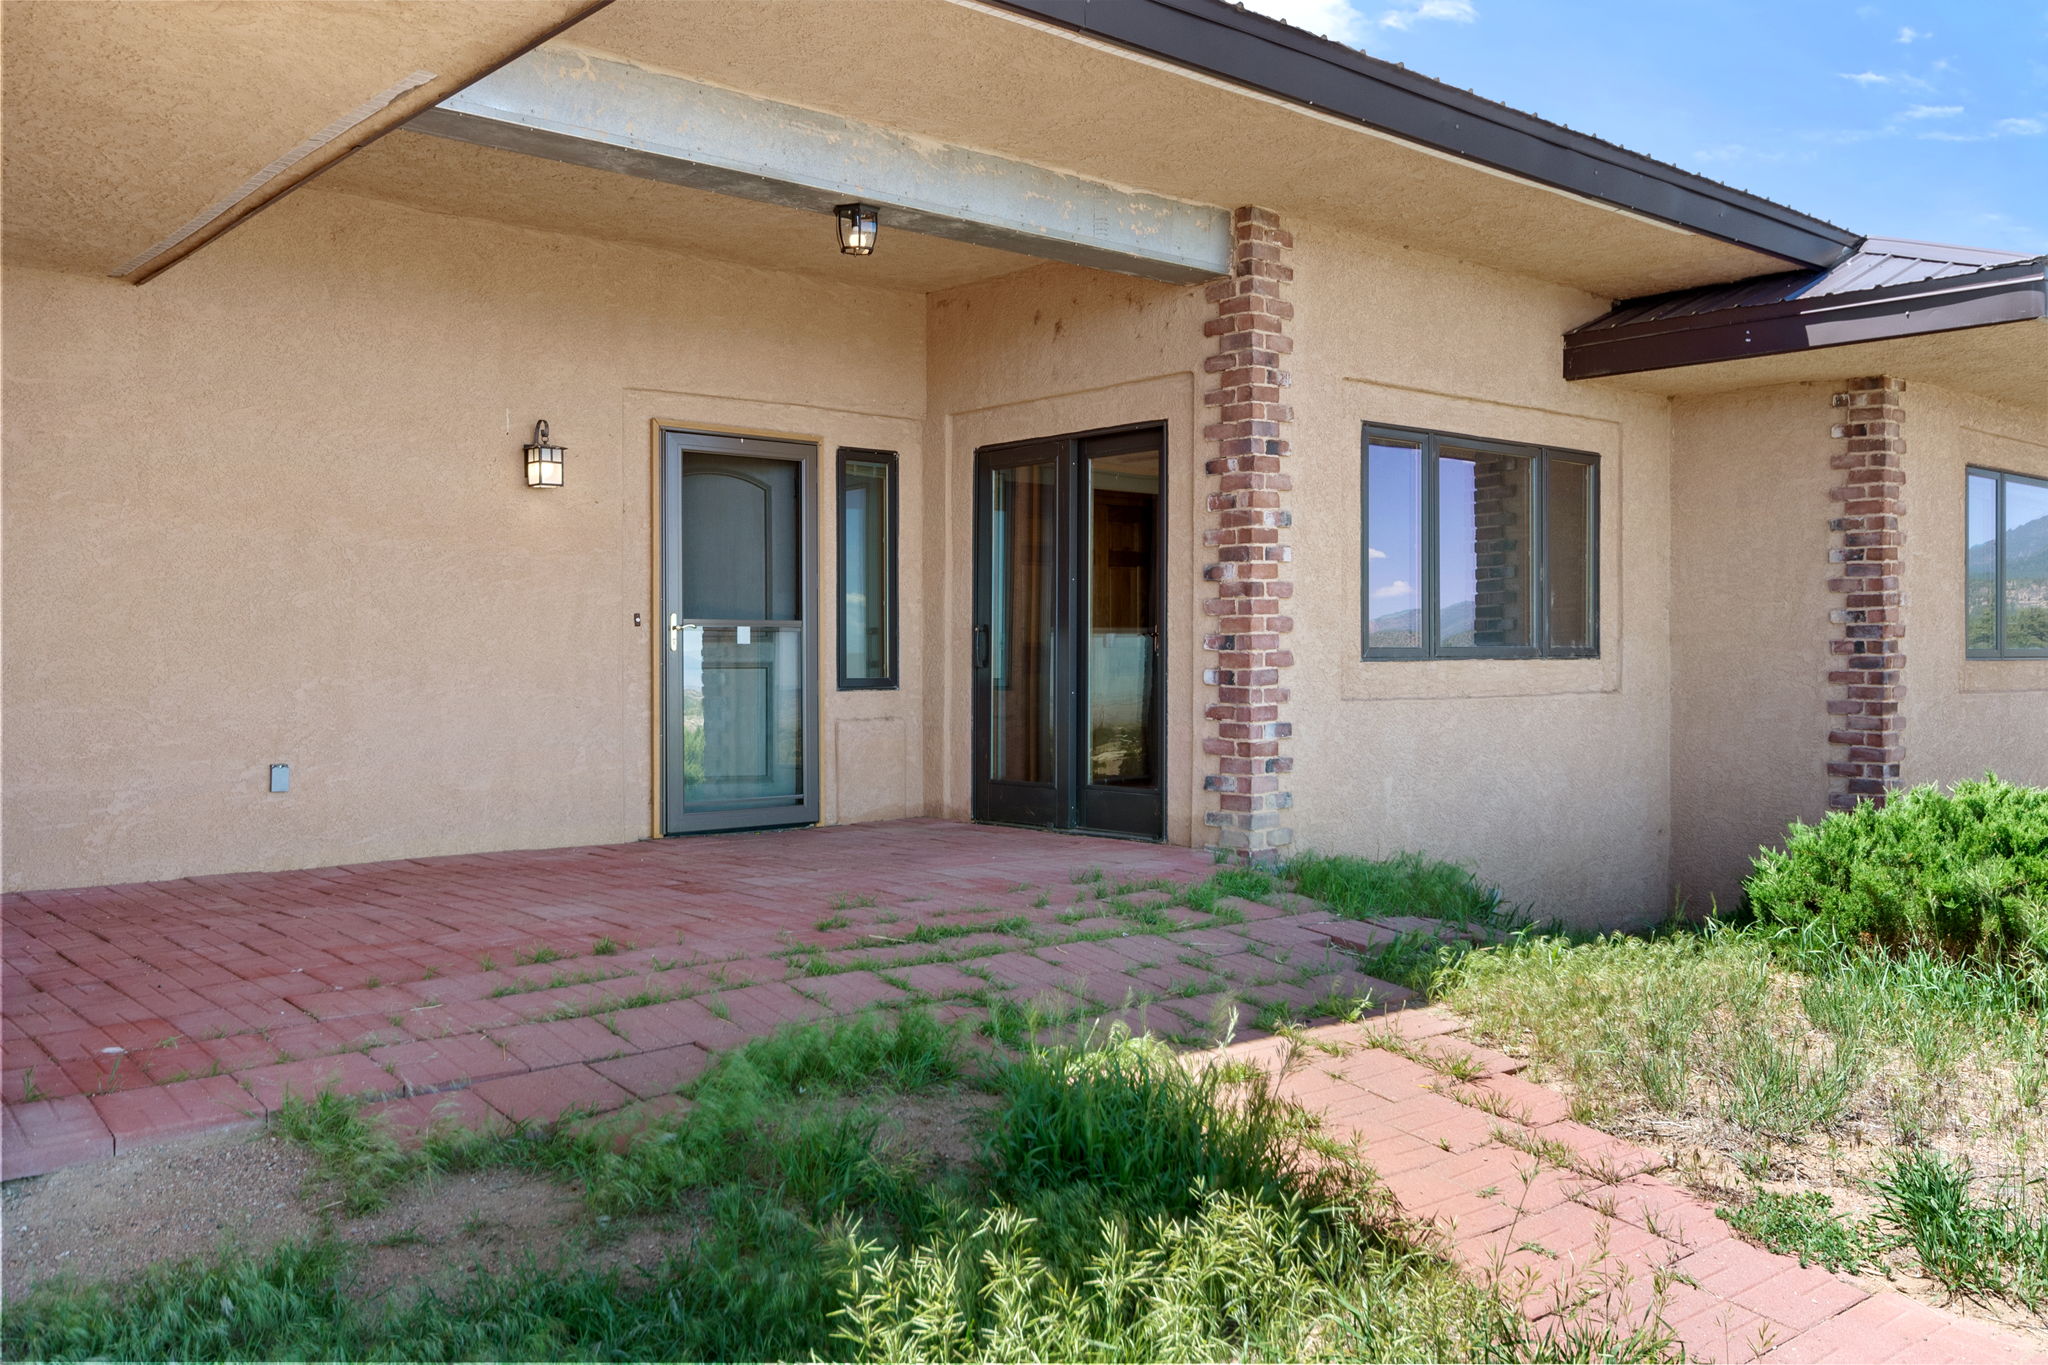  460 Co Rd 290, Florence, CO 81226, US Photo 6